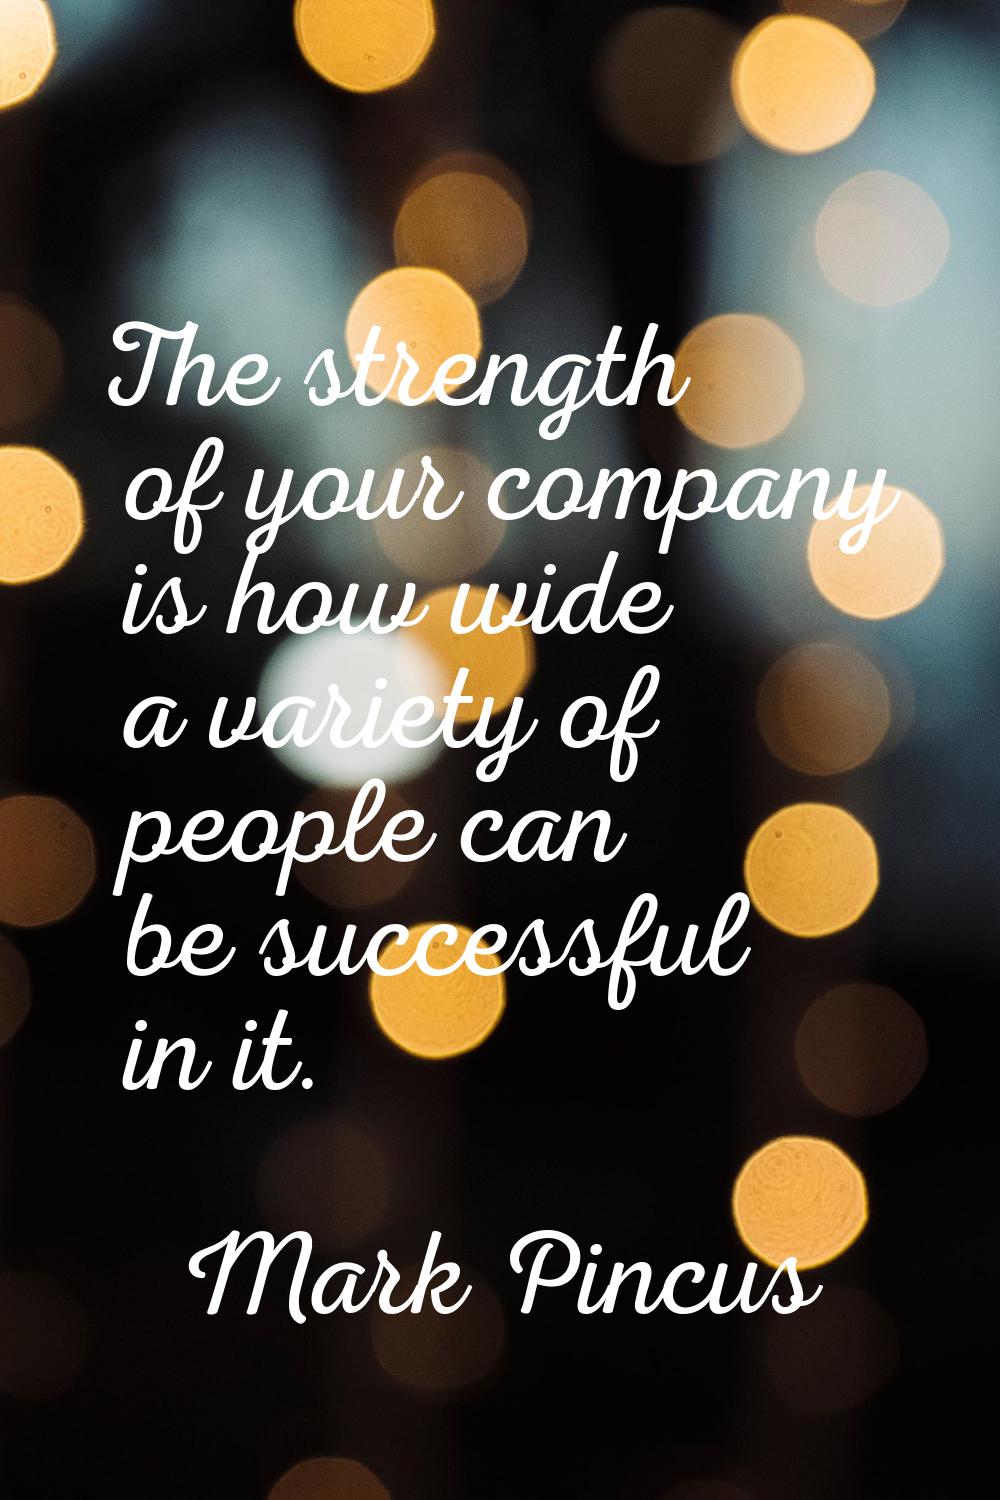 The strength of your company is how wide a variety of people can be successful in it.